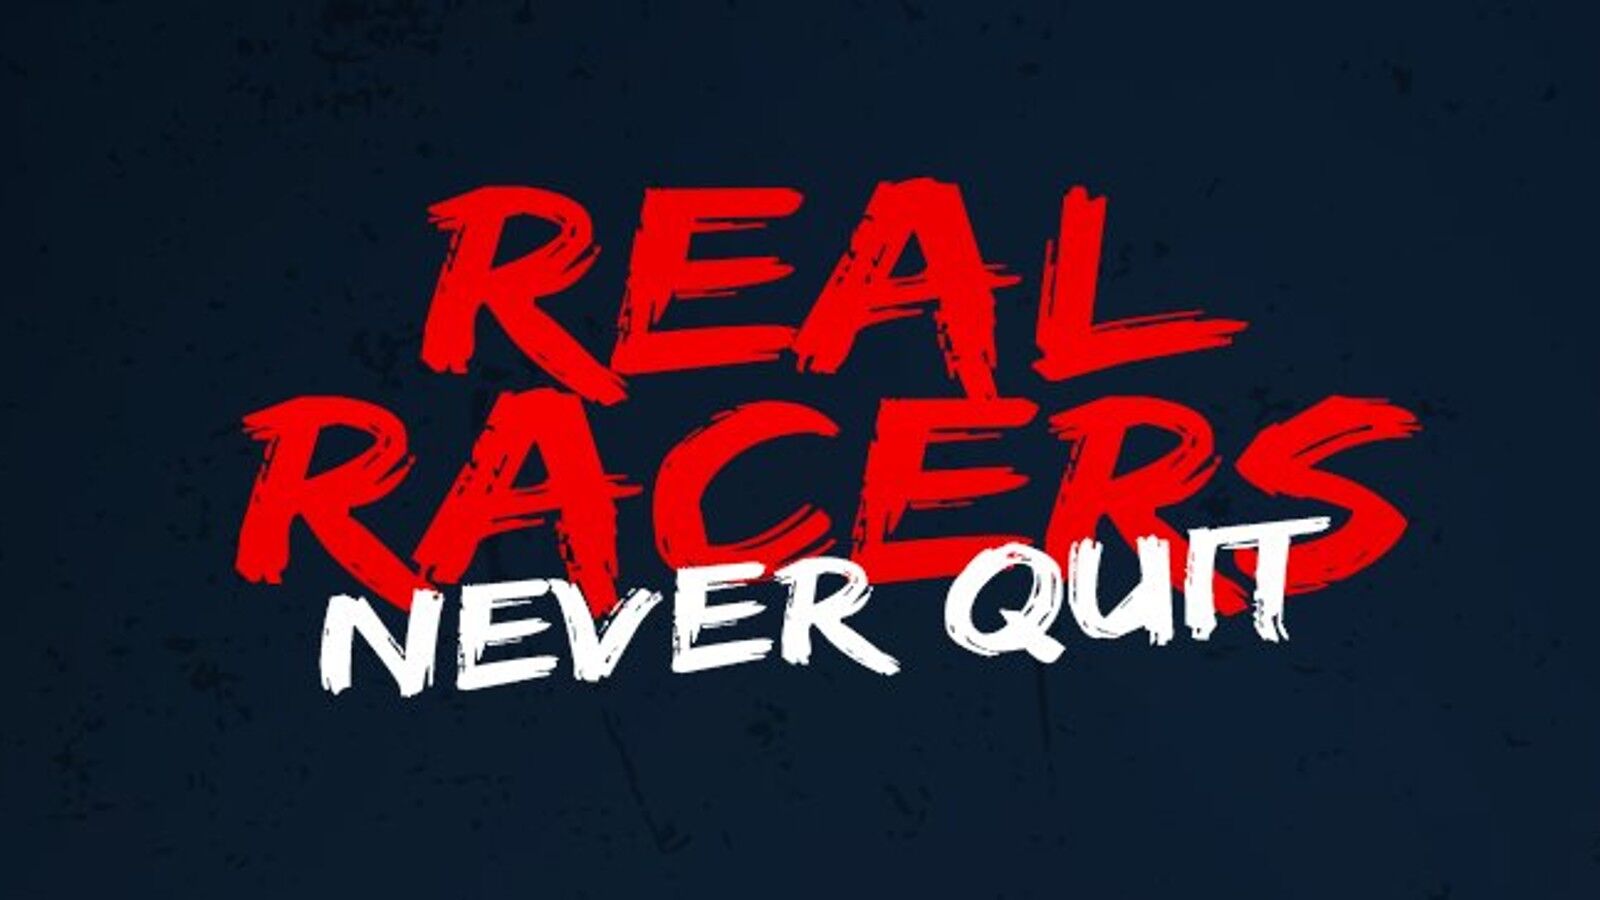 A logo for Real Racers Never Quit